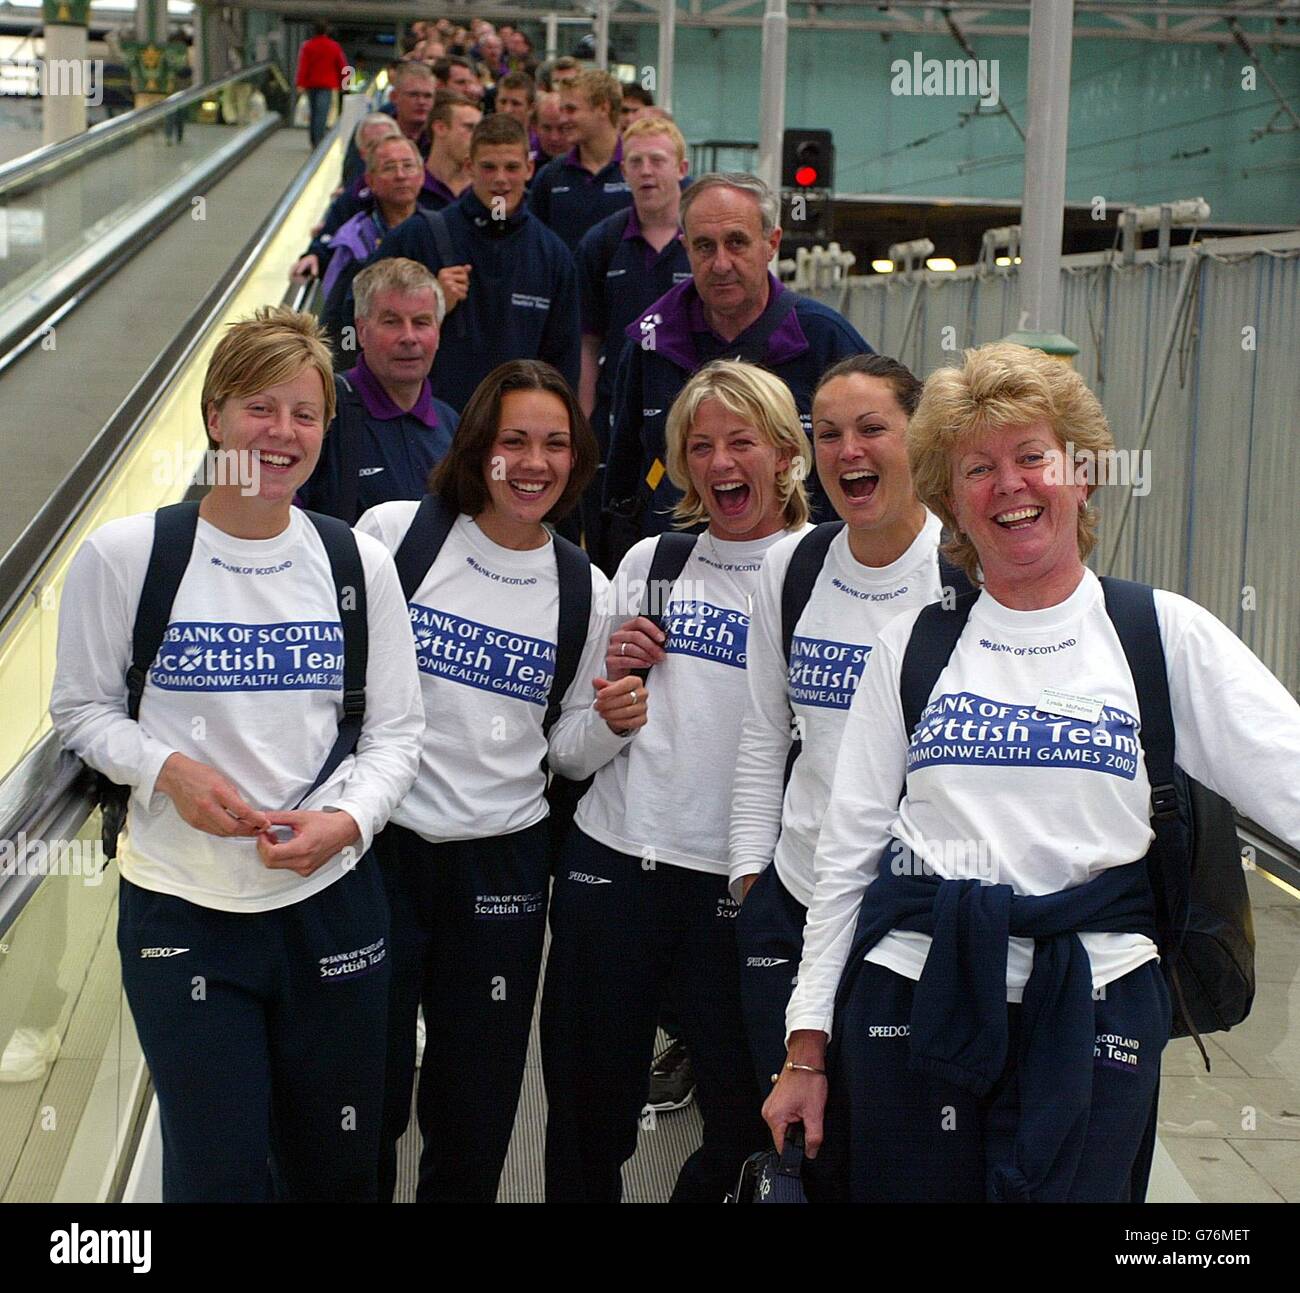 Members of the Scottish Commonwealth Games ladies hockey team arrive with the squad at Piccadilly Station in Manchester. The summer event - which runs between 25 July and 4 August - will attract 5,000 athletes from 72 countries. Stock Photo